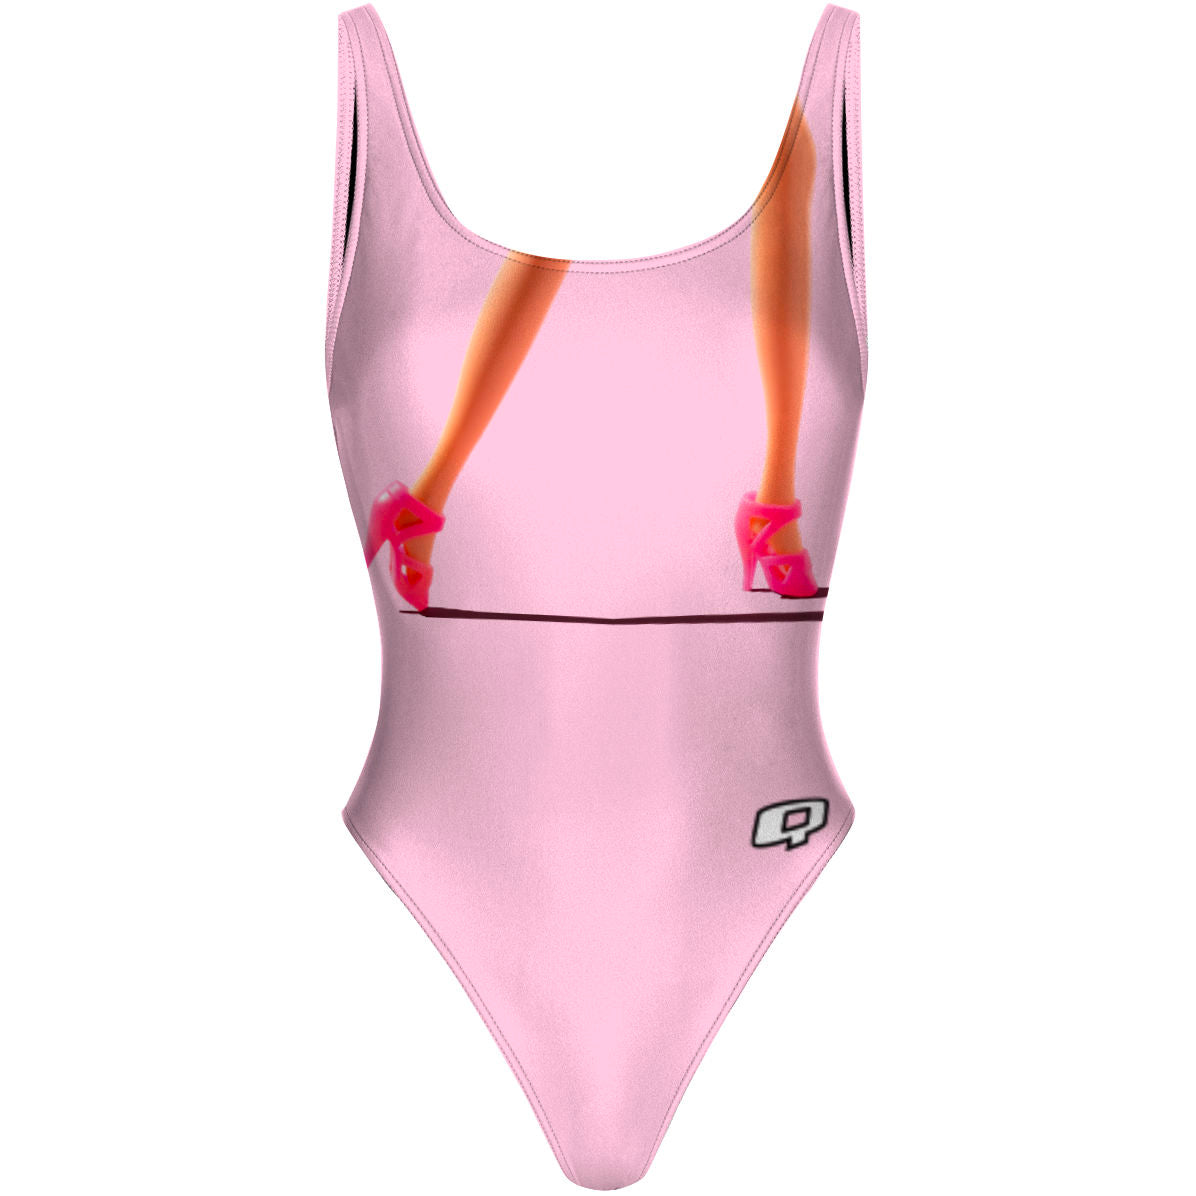 Pink legs for days - High Hip One Piece Swimsuit